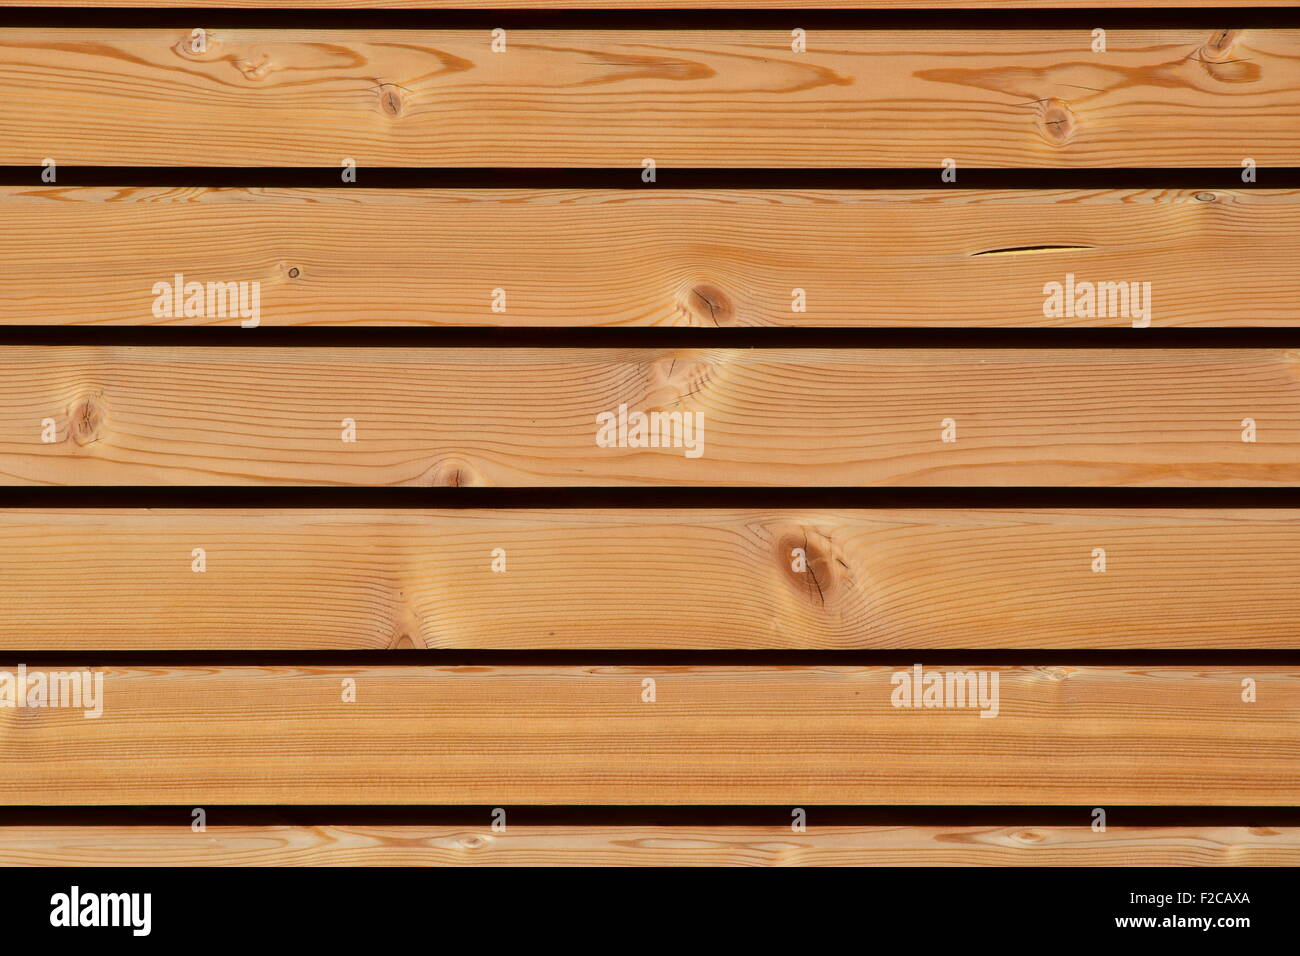 Brown wooden planks as background Stock Photo